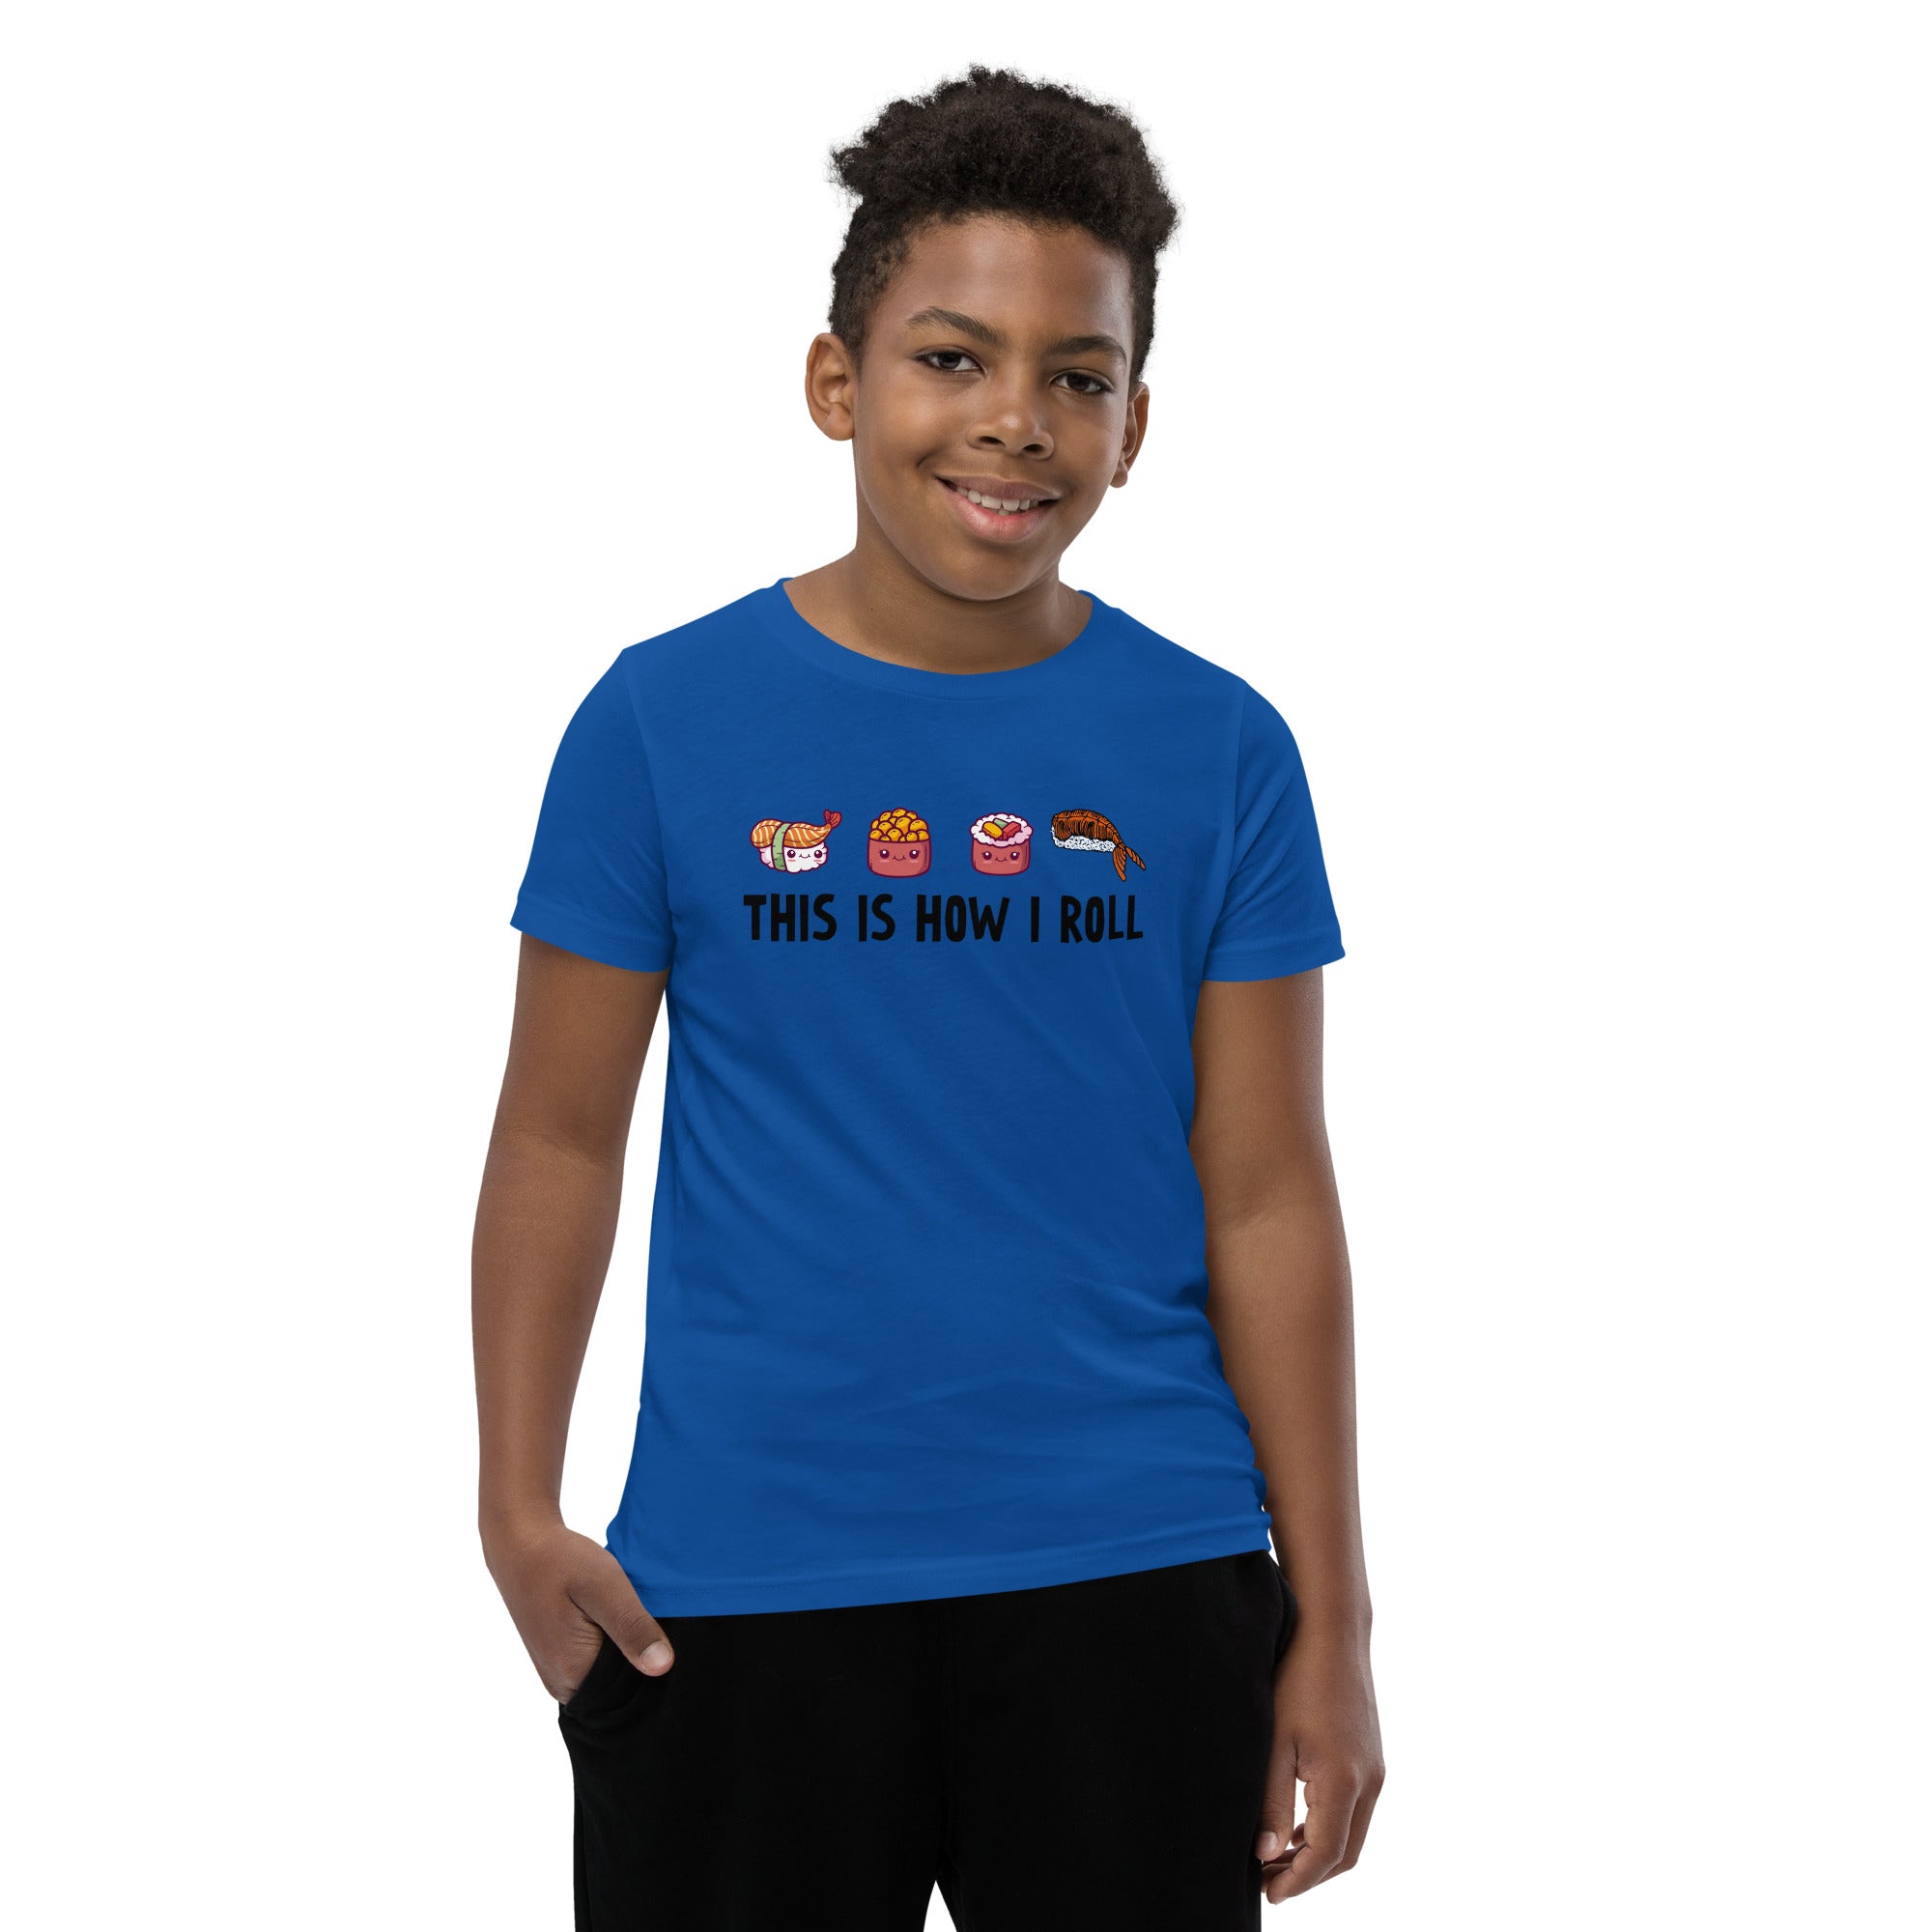 How I Roll - Youth Short Sleeve T-Shirt